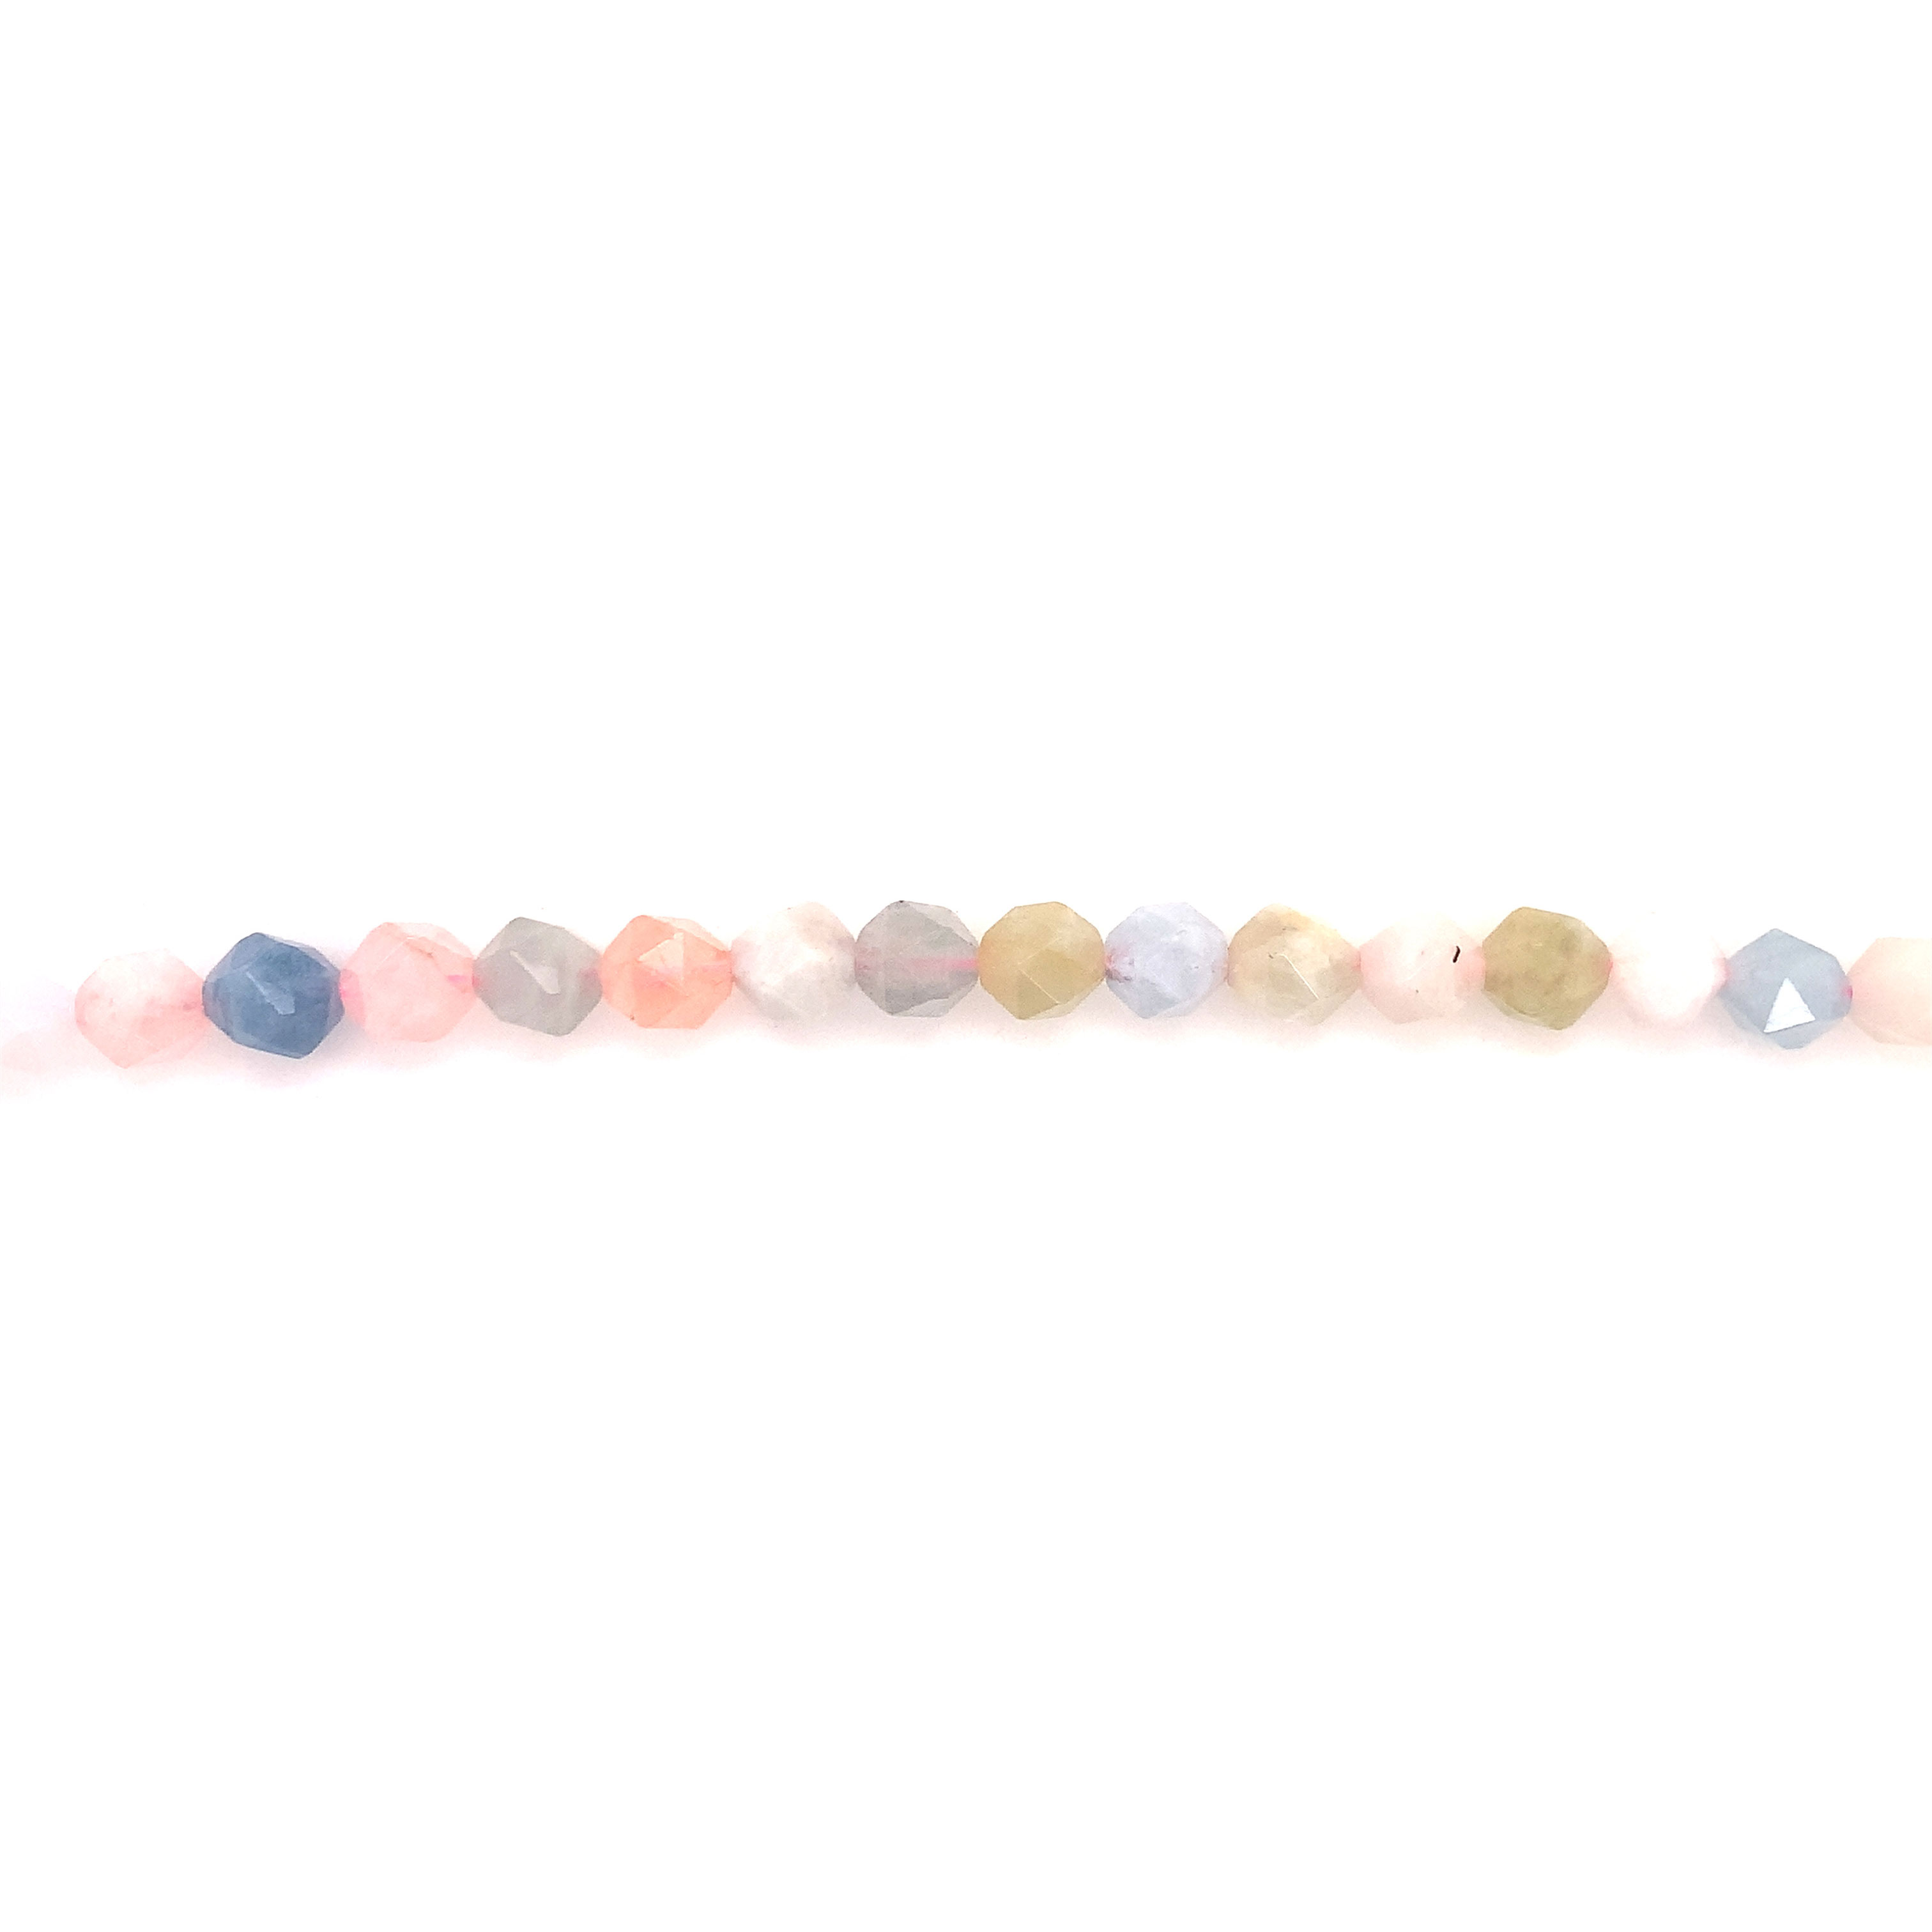 8mm Beryl Beads - Faceted